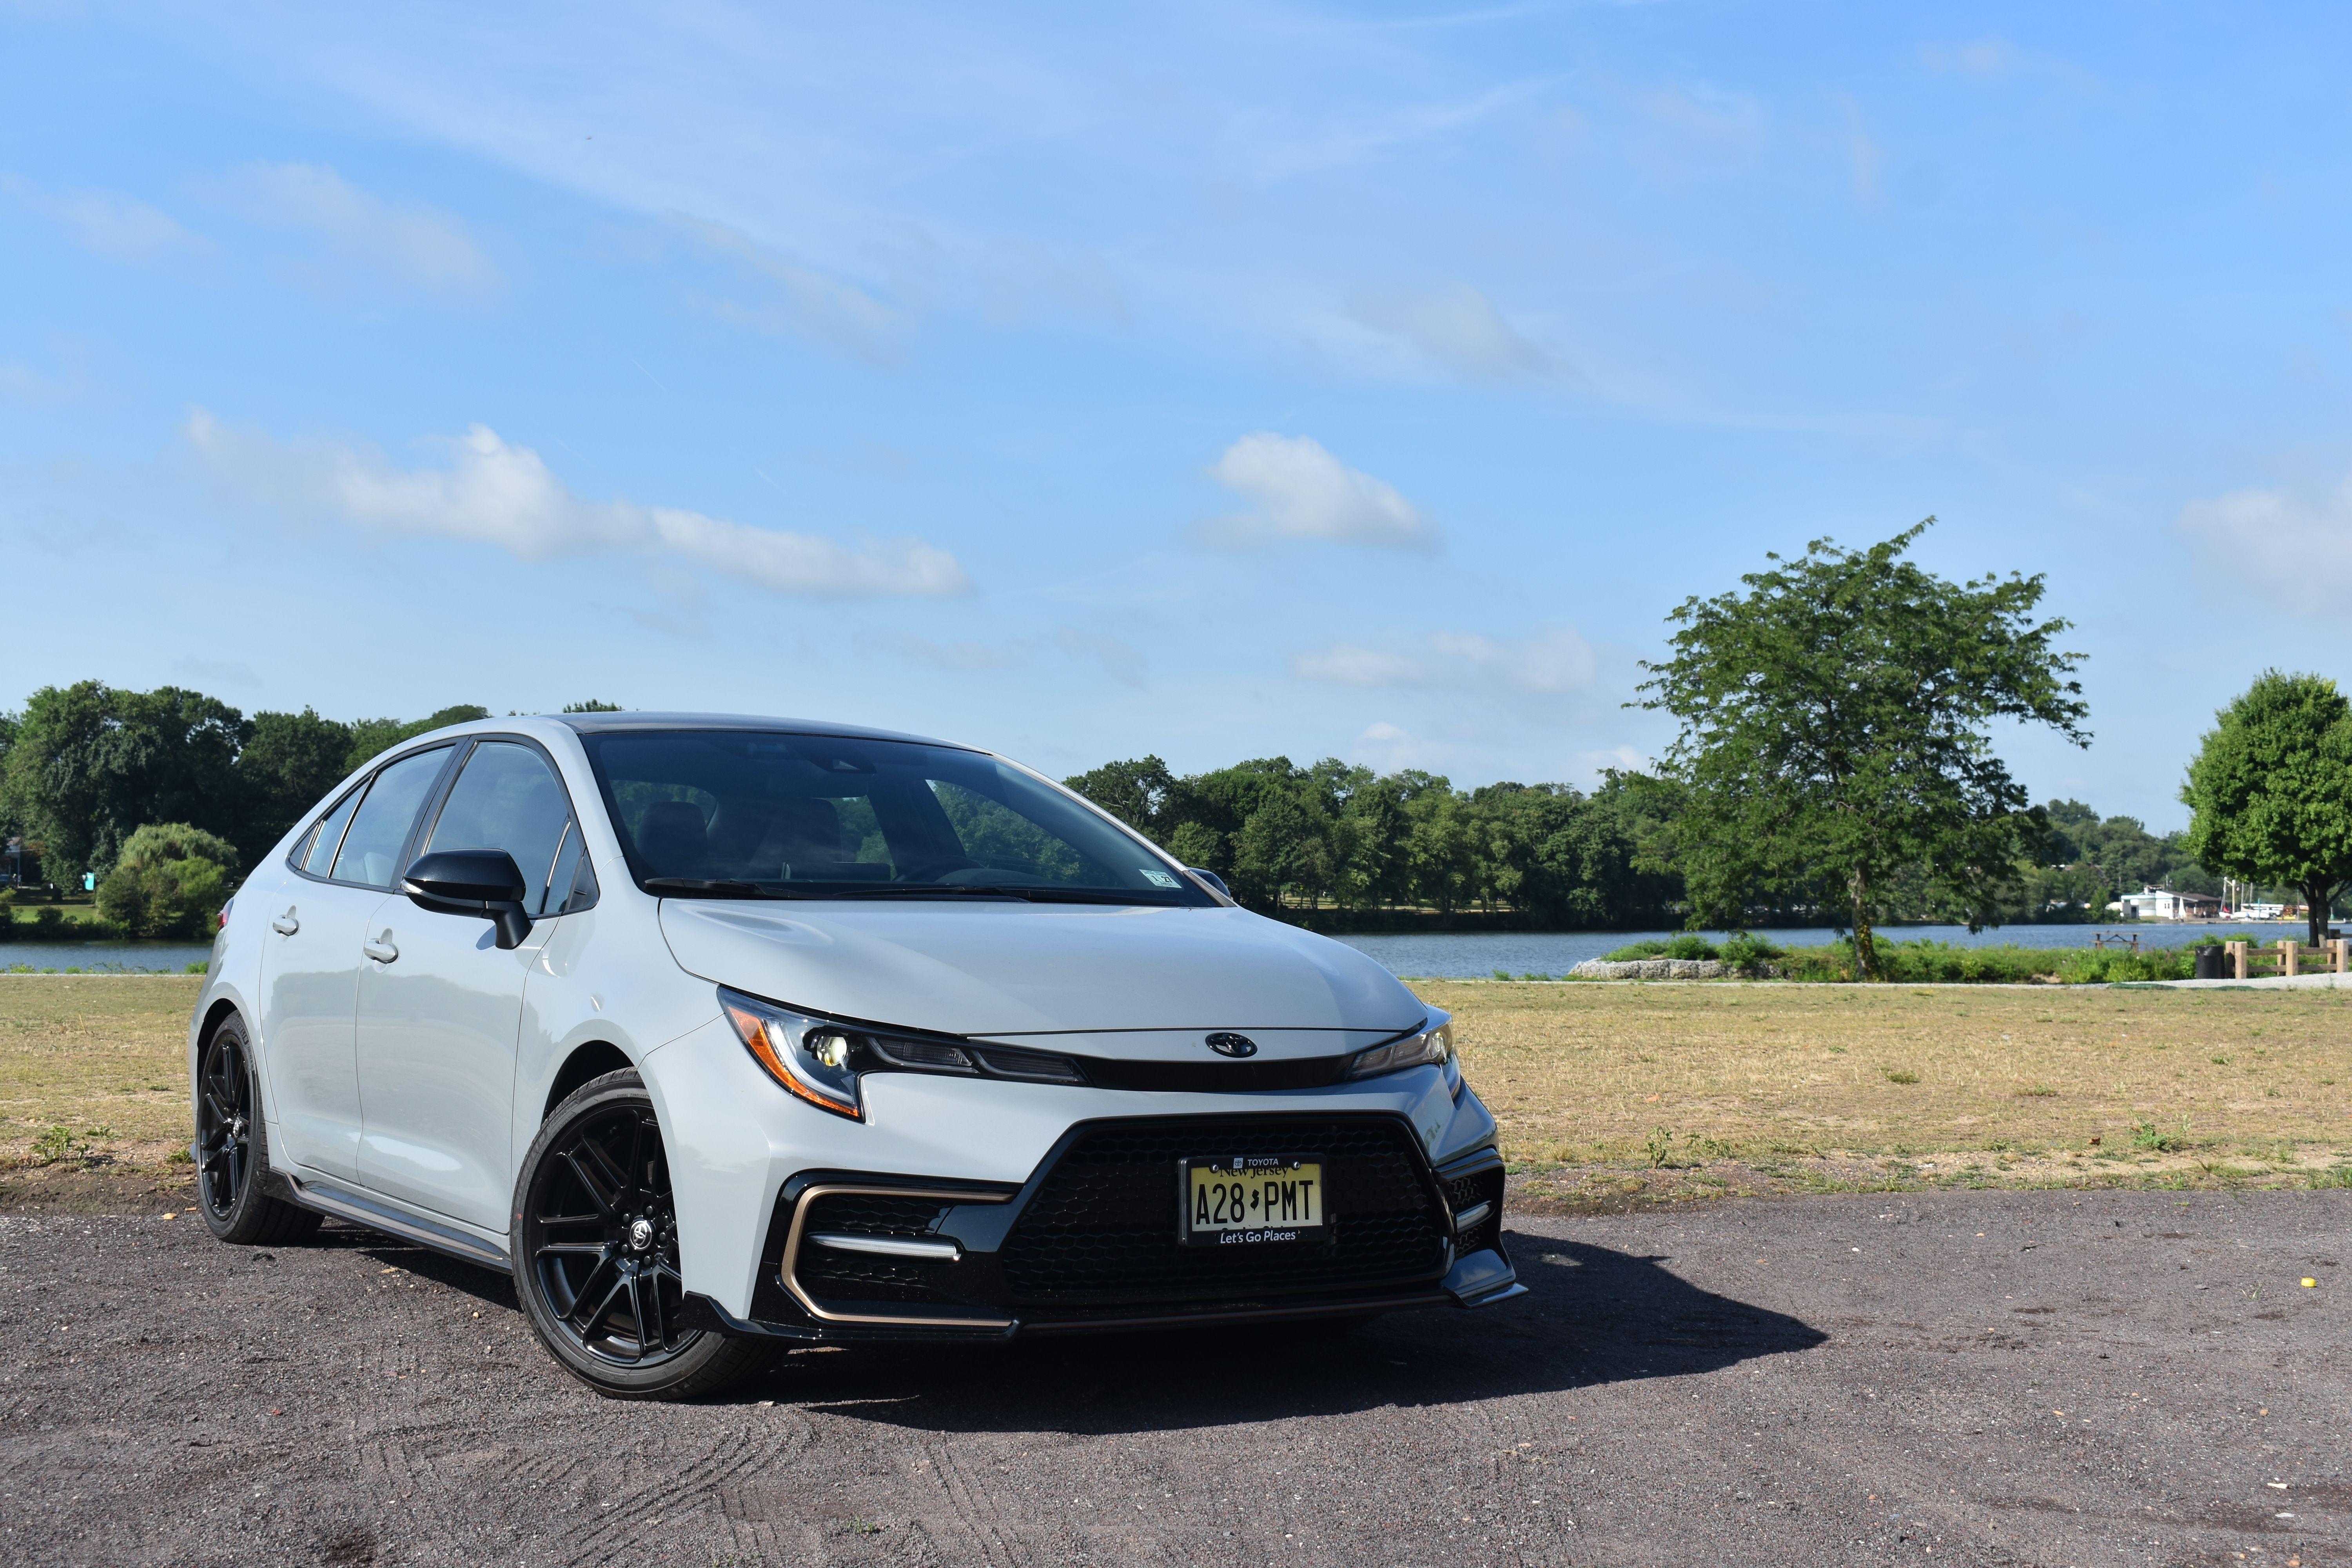 2022 Toyota Corolla APEX Review: The Sporty Compact Car For The Enthusiast